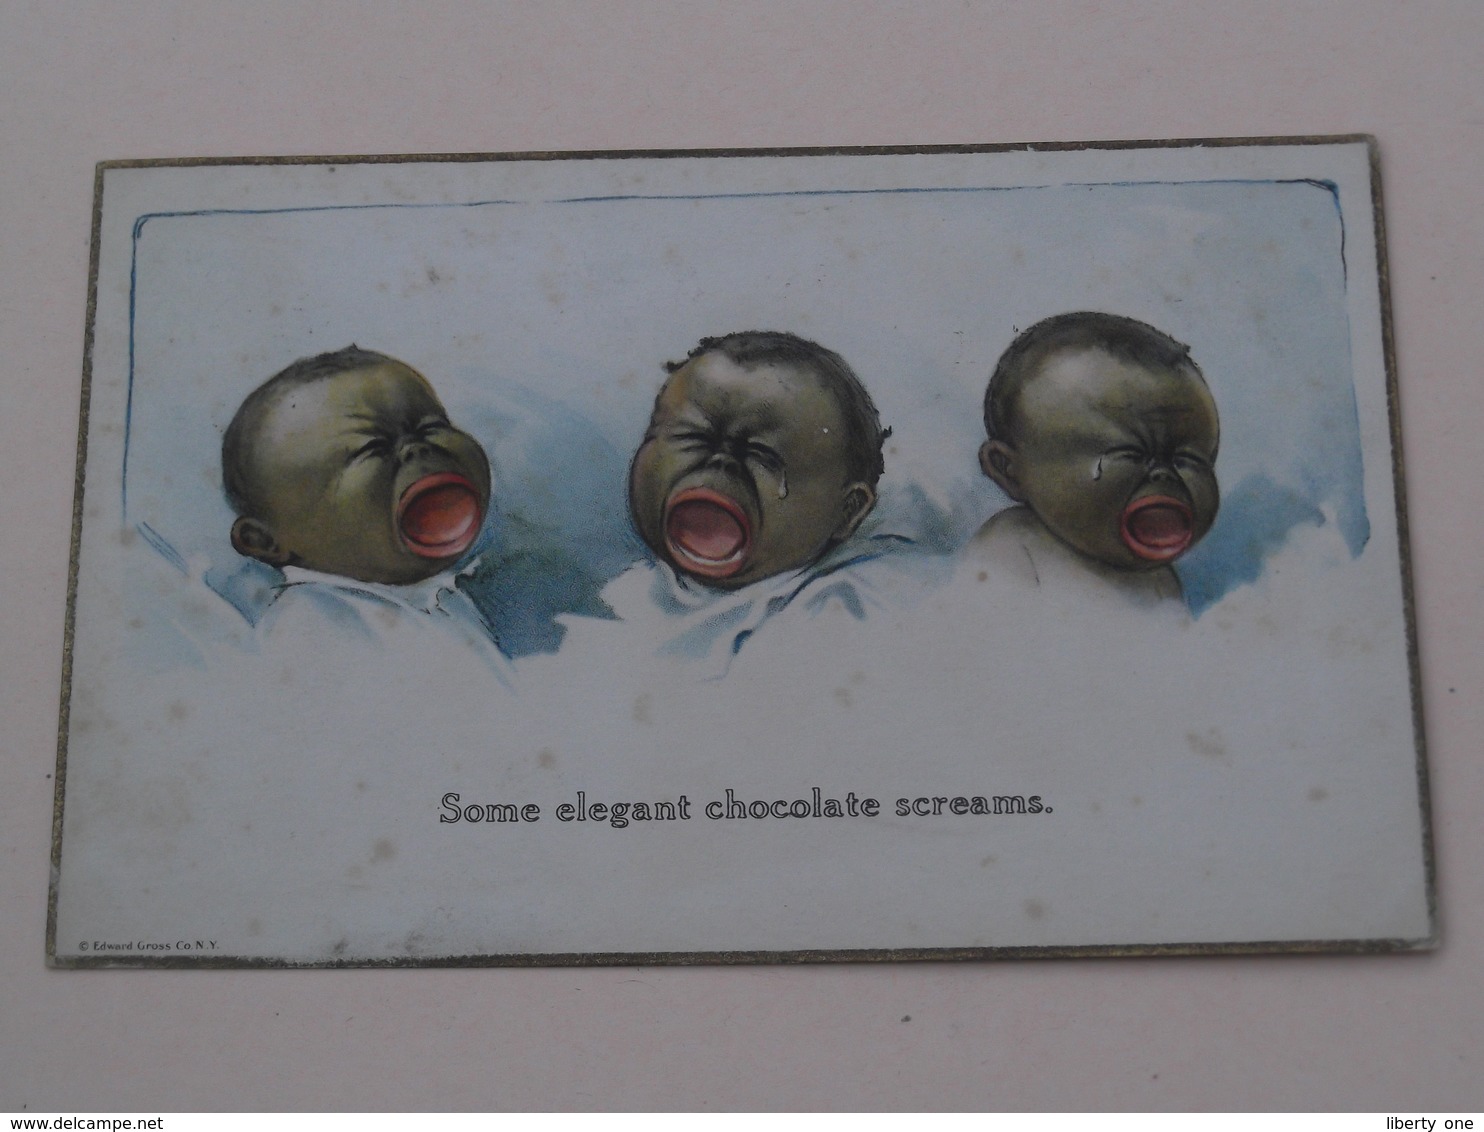 Some ELEGANT Chocolate SCREAMS ( Comic N° 65 - Smile Messengers ) Anno 1924 Galesburg ILL USA ( See Zie/voir Photo ) ! - Humour